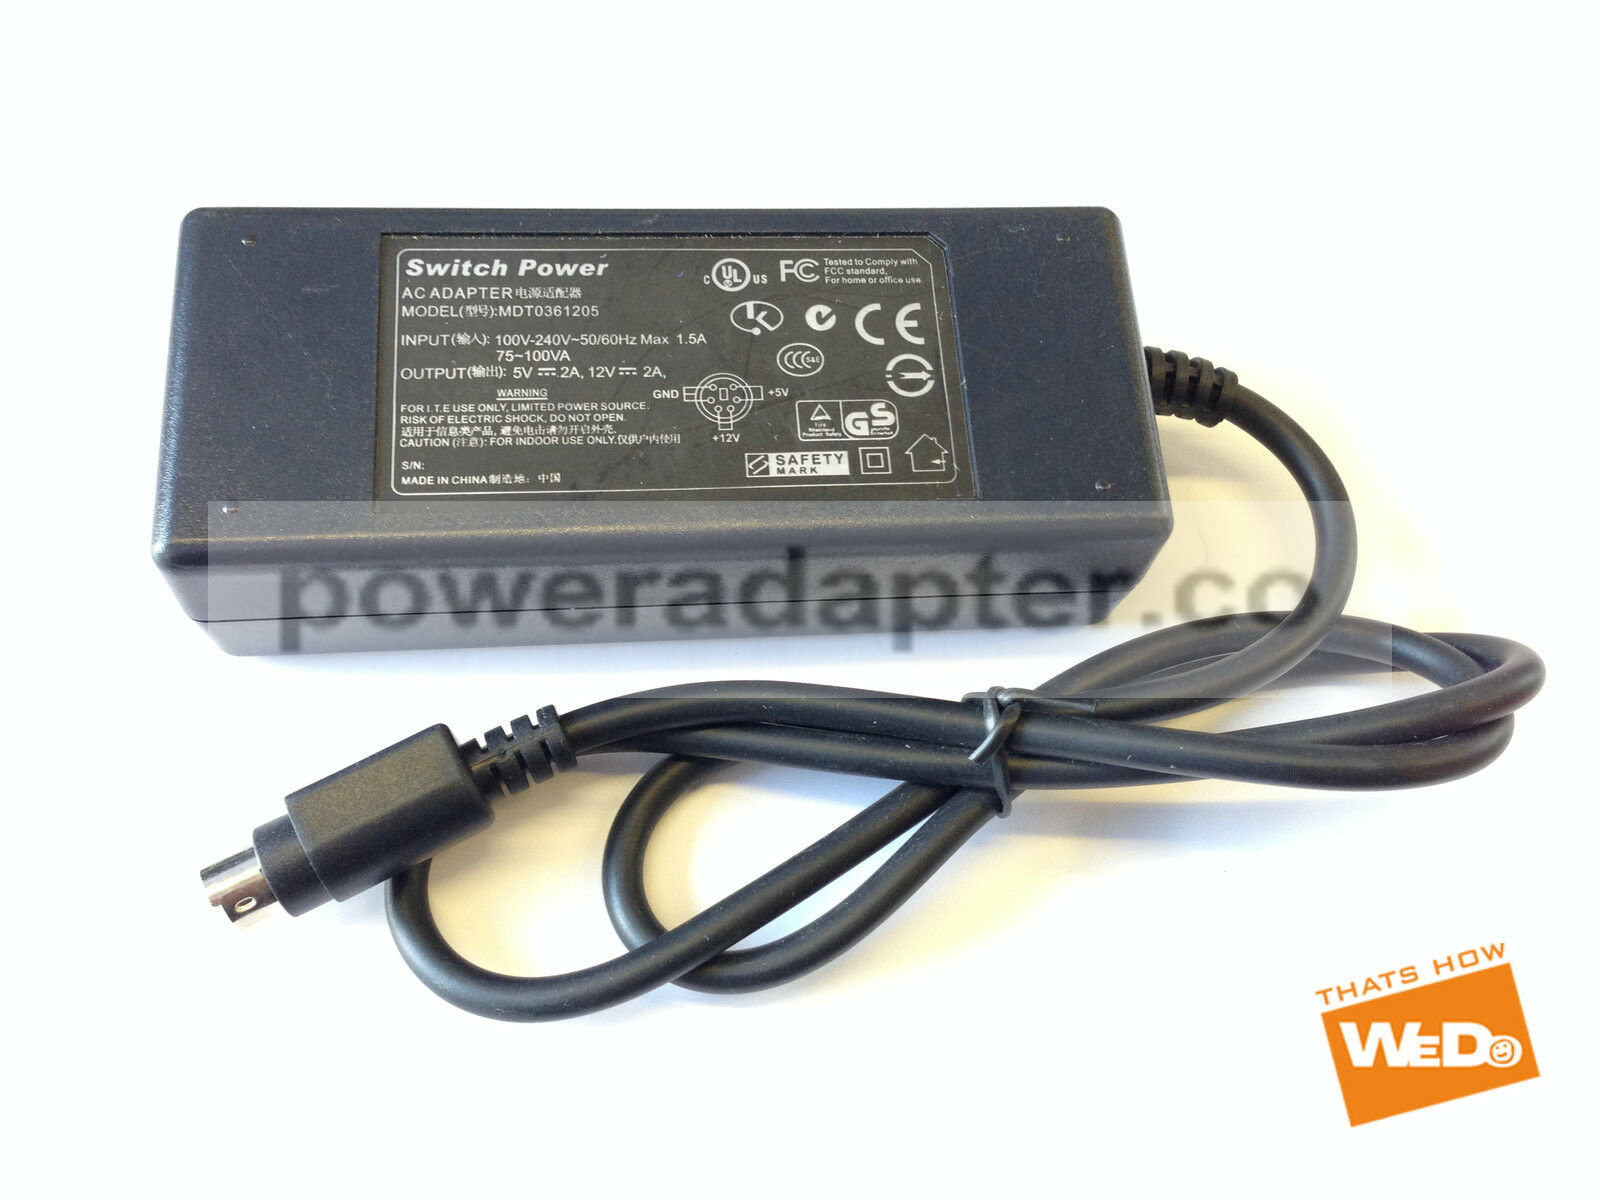 SWITCH POWER MDT0361205 POWER SUPPLY AC ADAPTER 5V 12V 2A 6 PIN WE ARE SERIOUS SELLERS SO BE ASSURED YOU WILL RECEIVE